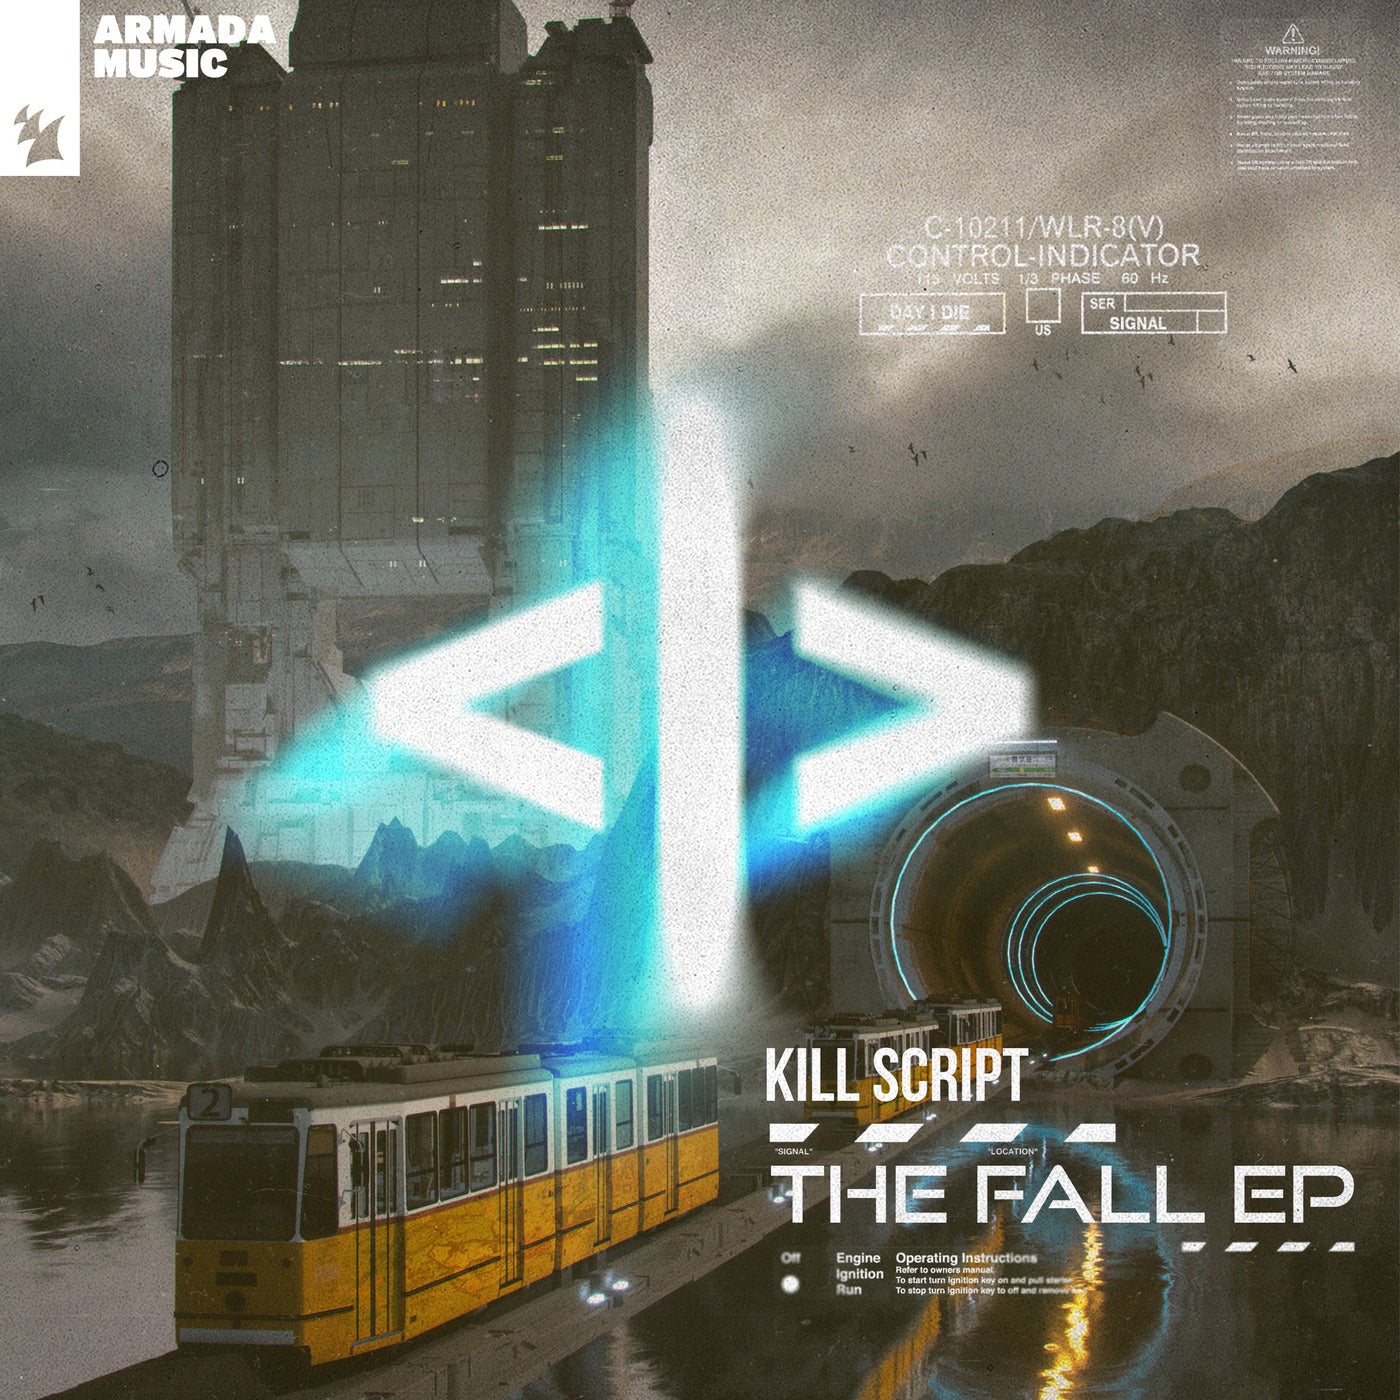 THE FALL EP